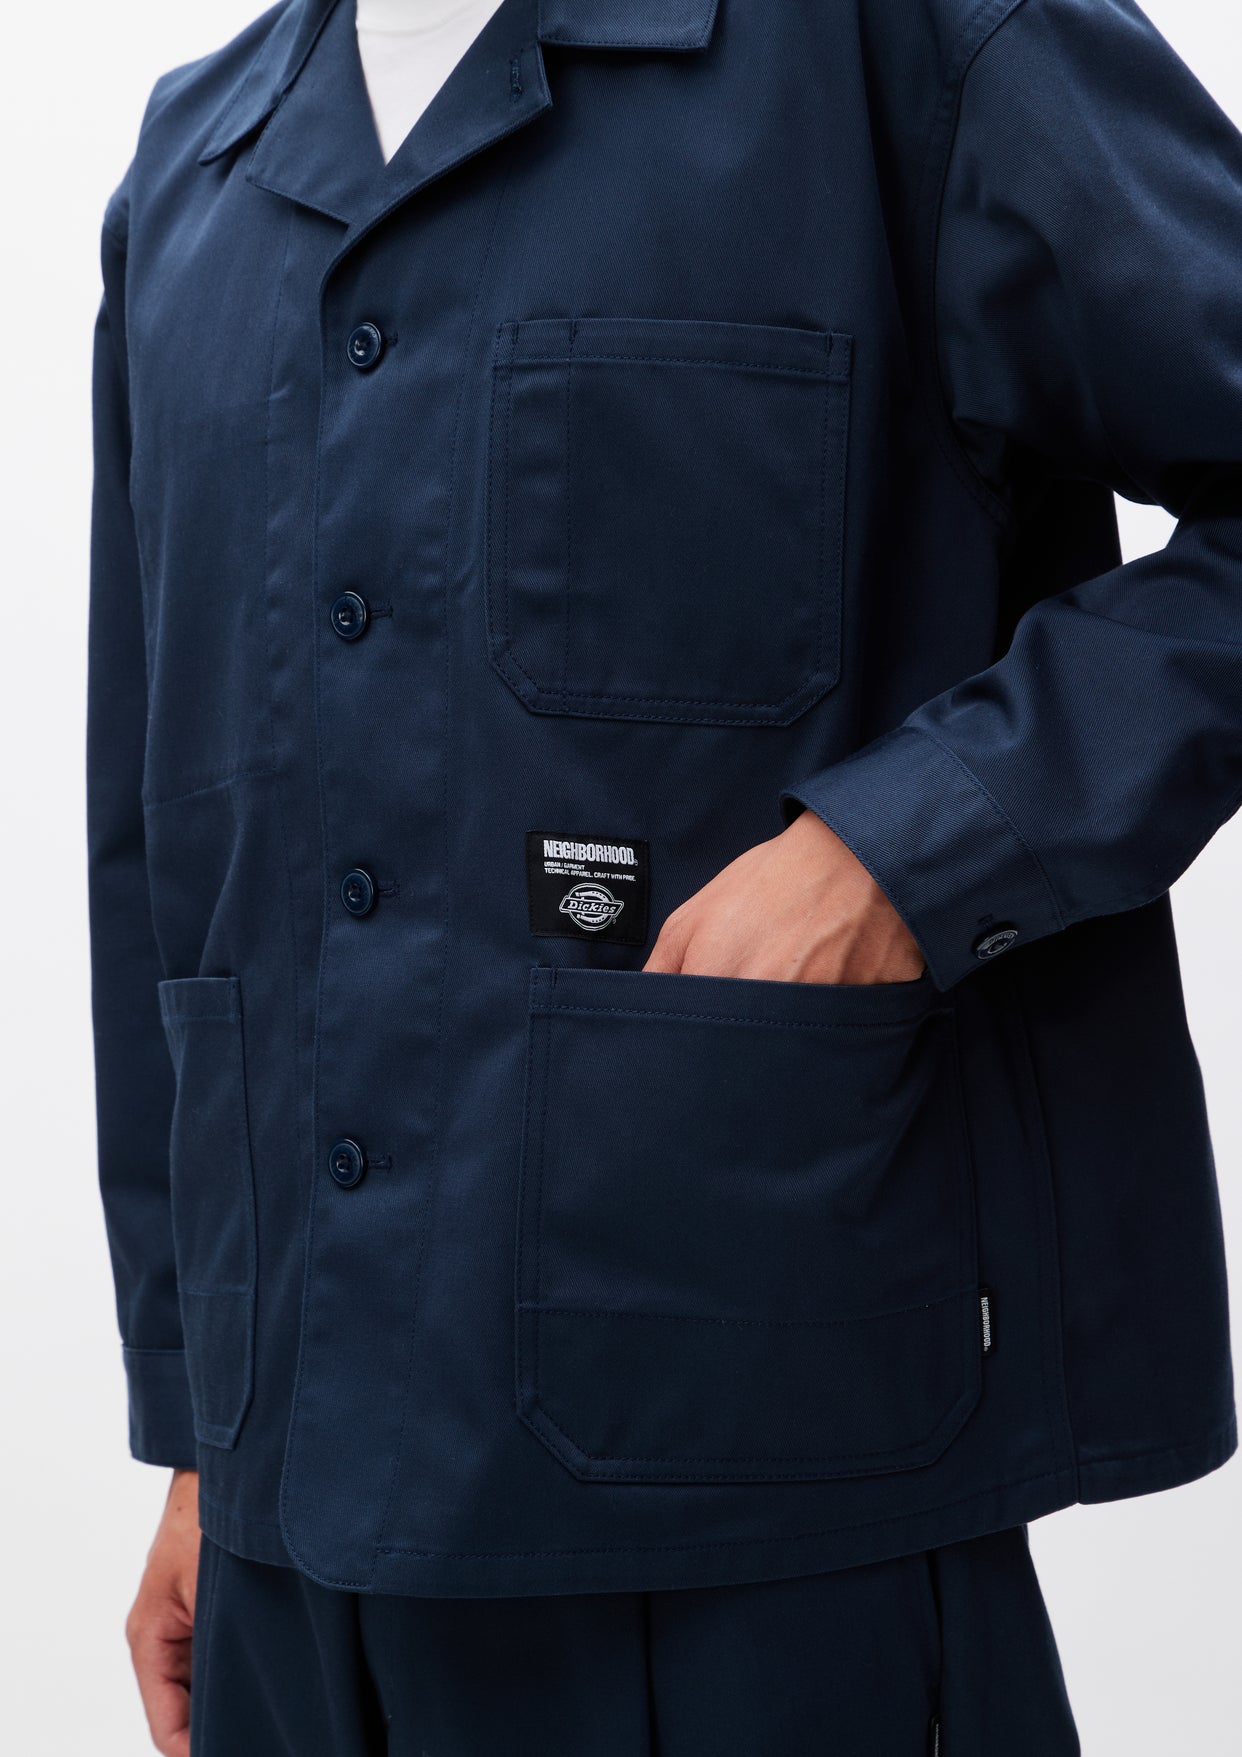 NH X DICKIES . COVERALL JACKET NAVY M